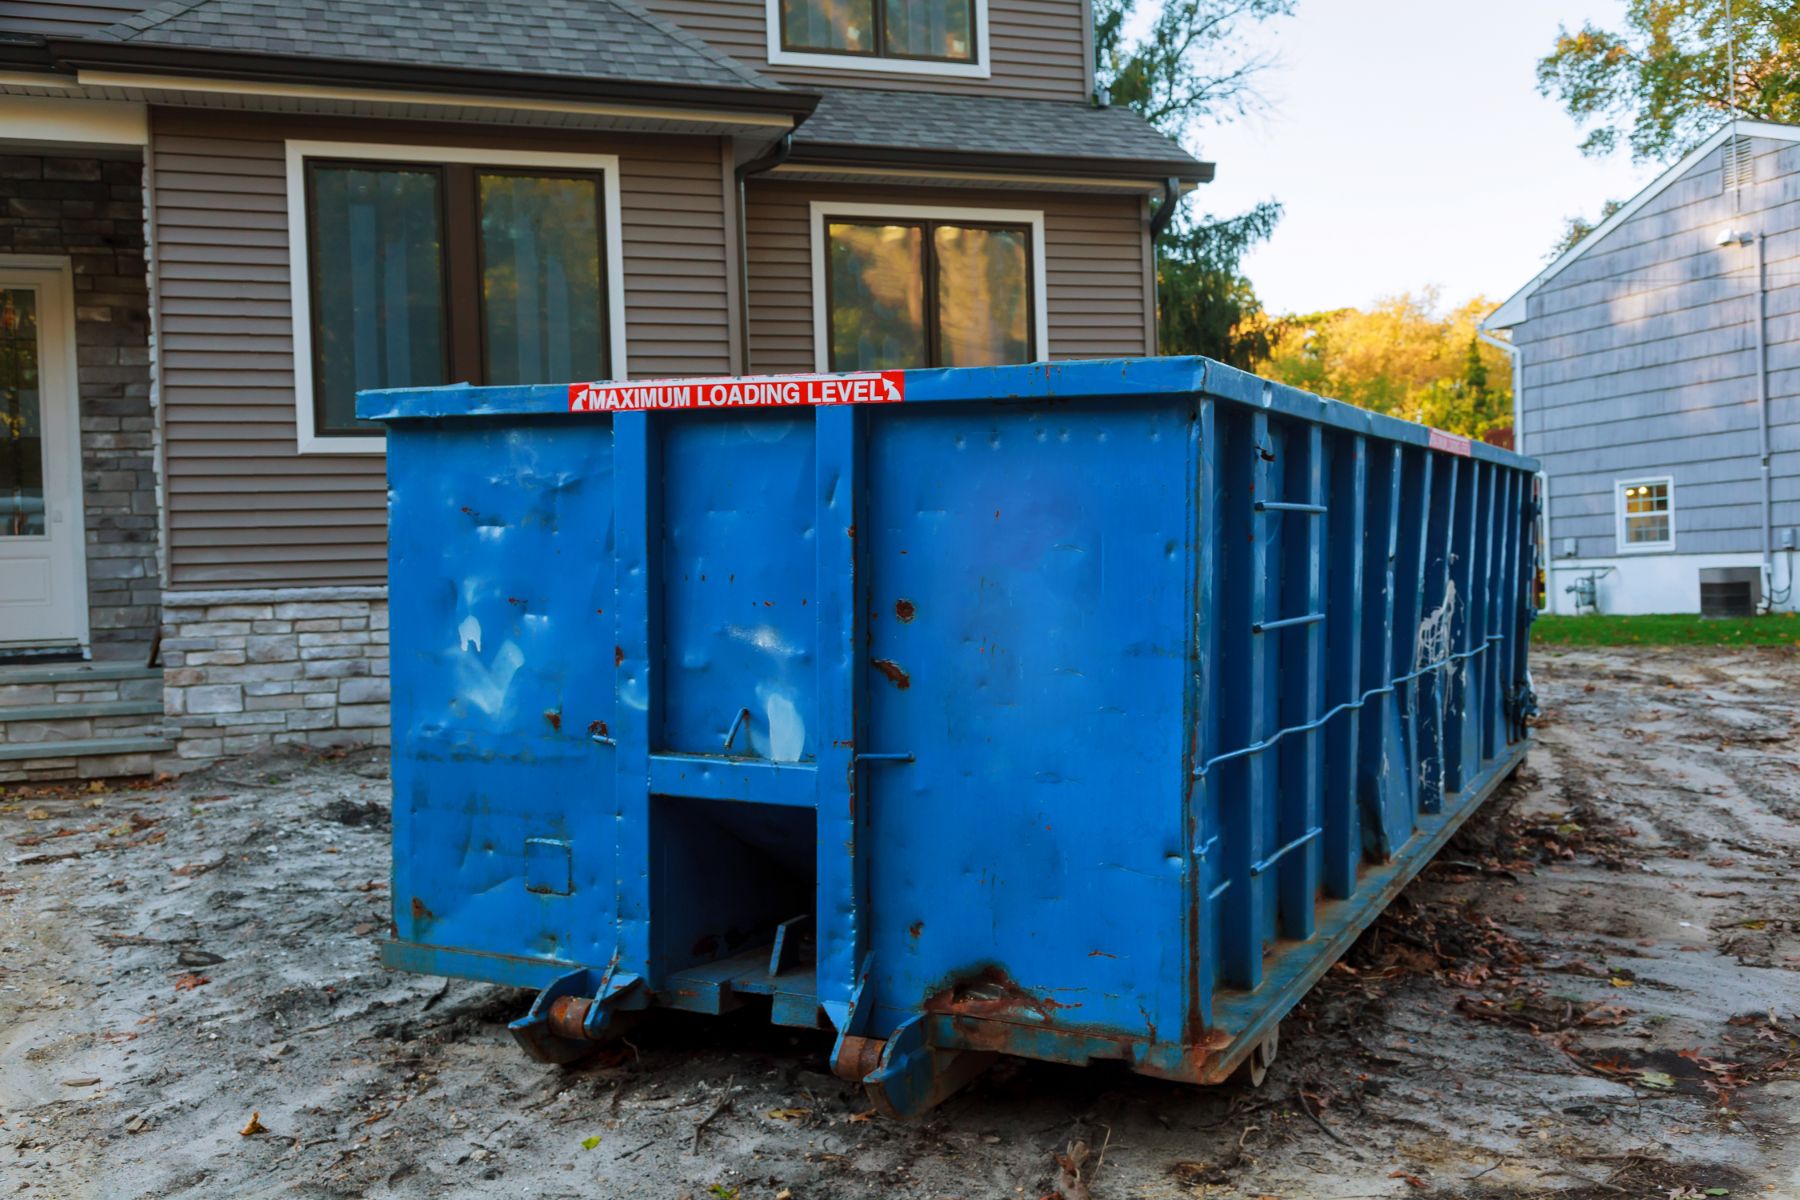 ACR Dumpsters providing reliable dumpster rental service in Calhoun County, Michigan.